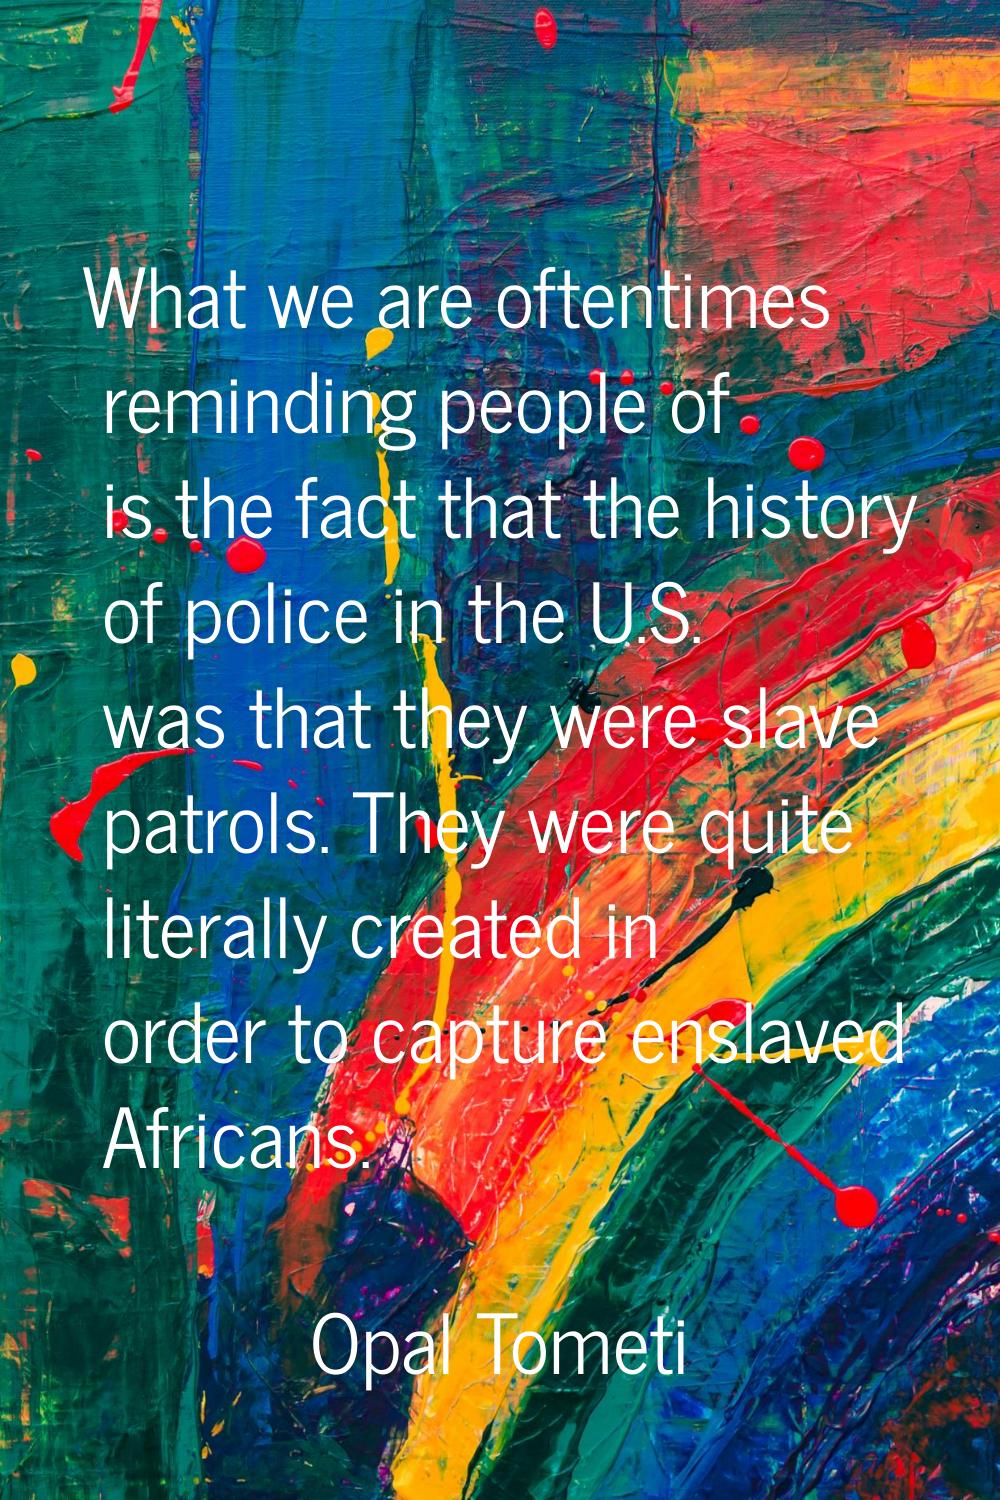 What we are oftentimes reminding people of is the fact that the history of police in the U.S. was t